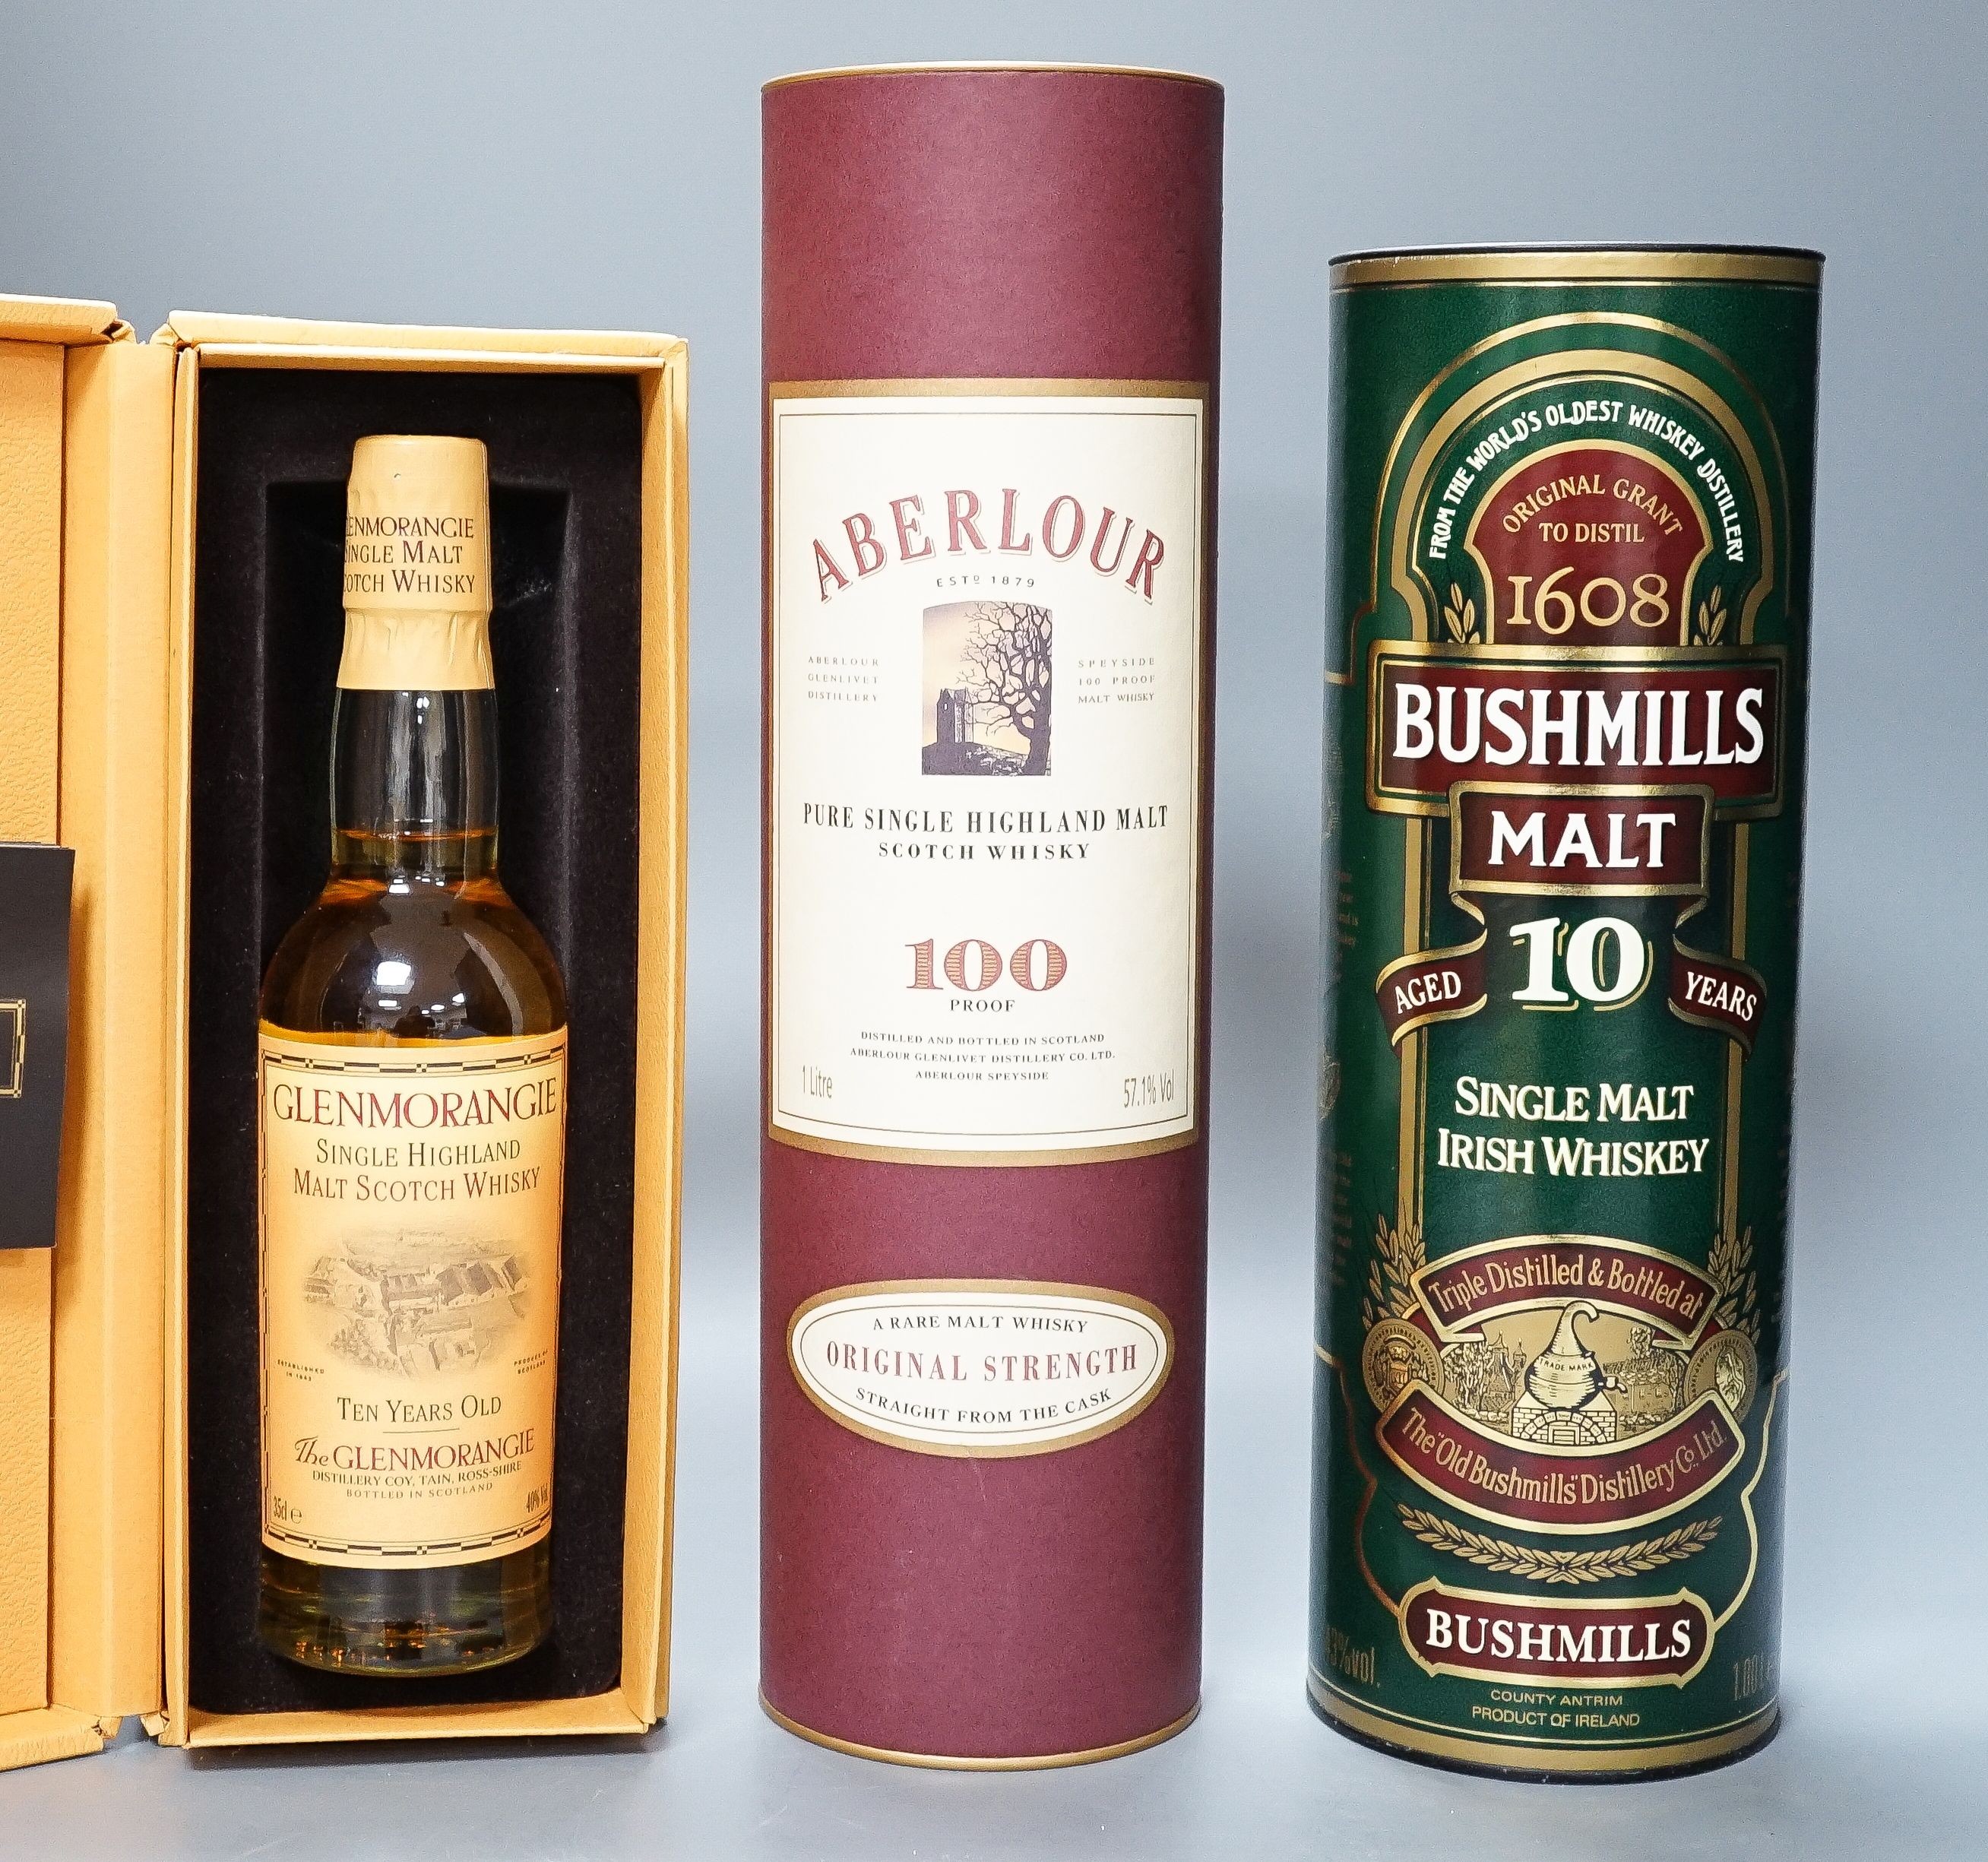 1 litre of 100 proof Abelour Scotch whisky, 1 litre of 10 year Bushmills Irish whiskey and a 35cl 10